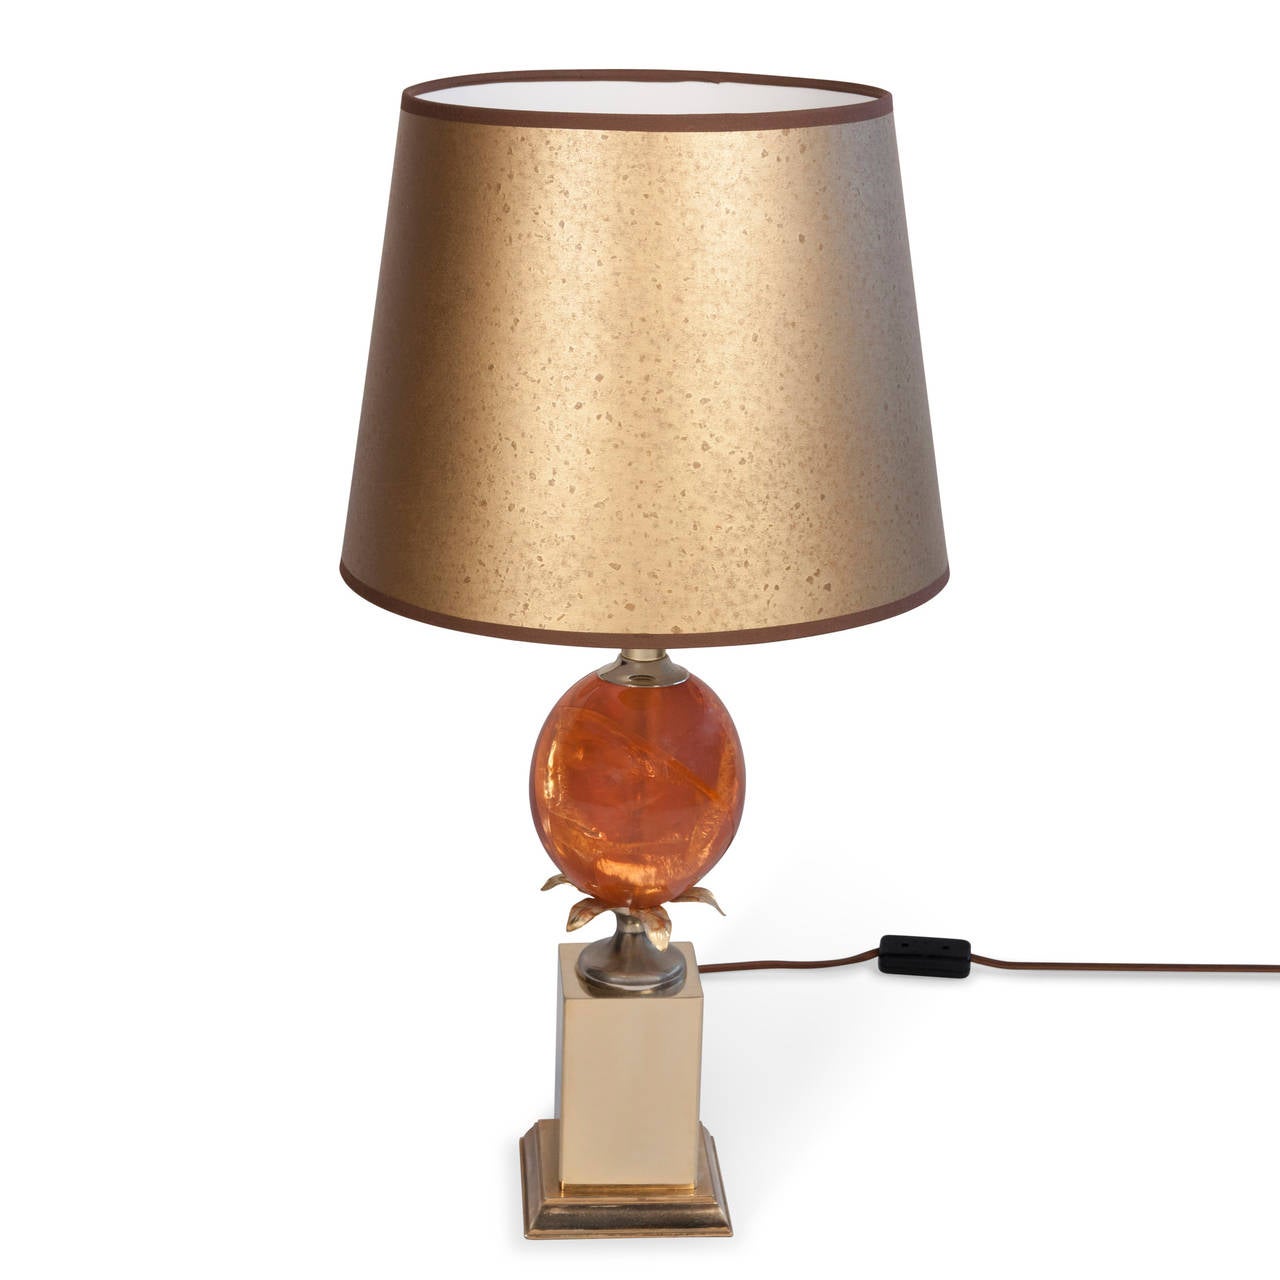 Single fractured resin table lamp, the orange resin in an ovoid shape, resting on a square brass base, French, early 1970s. In custom mottled gold paper shade. Overall height 25 1/2 in. Base measures 5 in square. Shade measures top diameter 10 in,